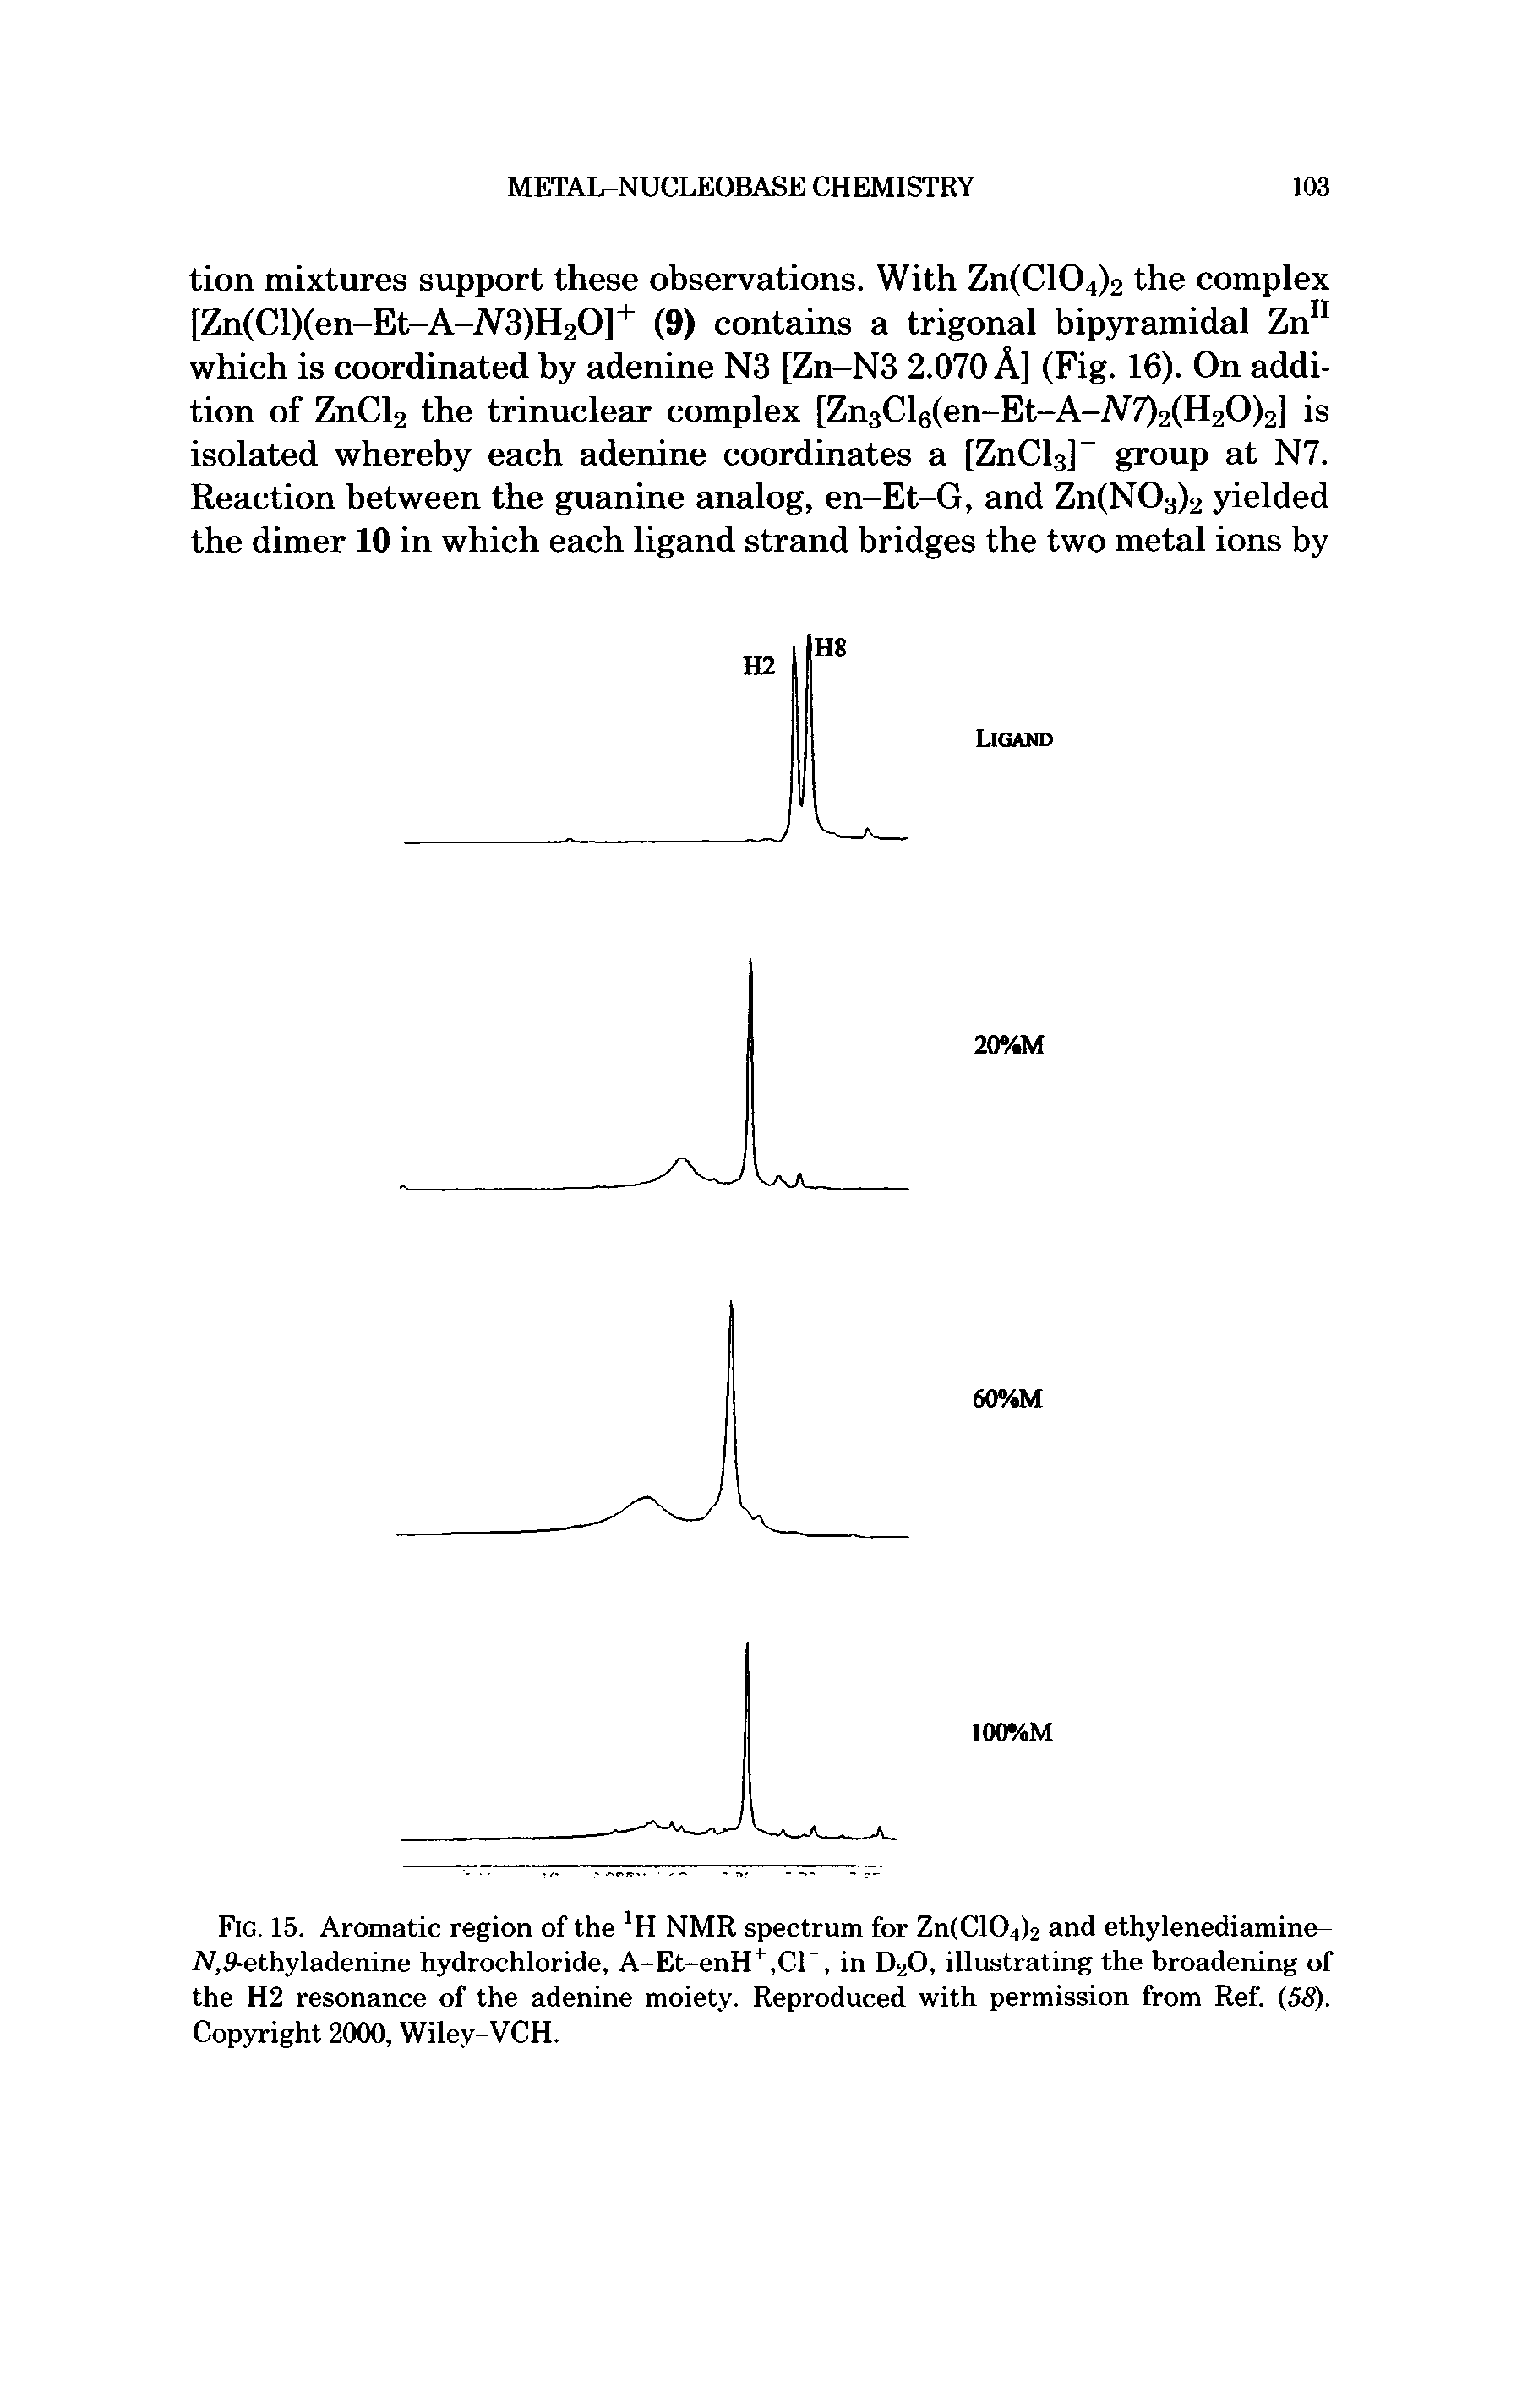 Fig. 15. Aromatic region of the H NMR spectrum for Zn(C104)2 and ethylenediamine-N,5-ethyladeninc hydrochloride, A-Et-enHf,Cl , in D20, illustrating the broadening of the H2 resonance of the adenine moiety. Reproduced with permission from Ref. (58). Copyright 2000, Wiley-VCH.